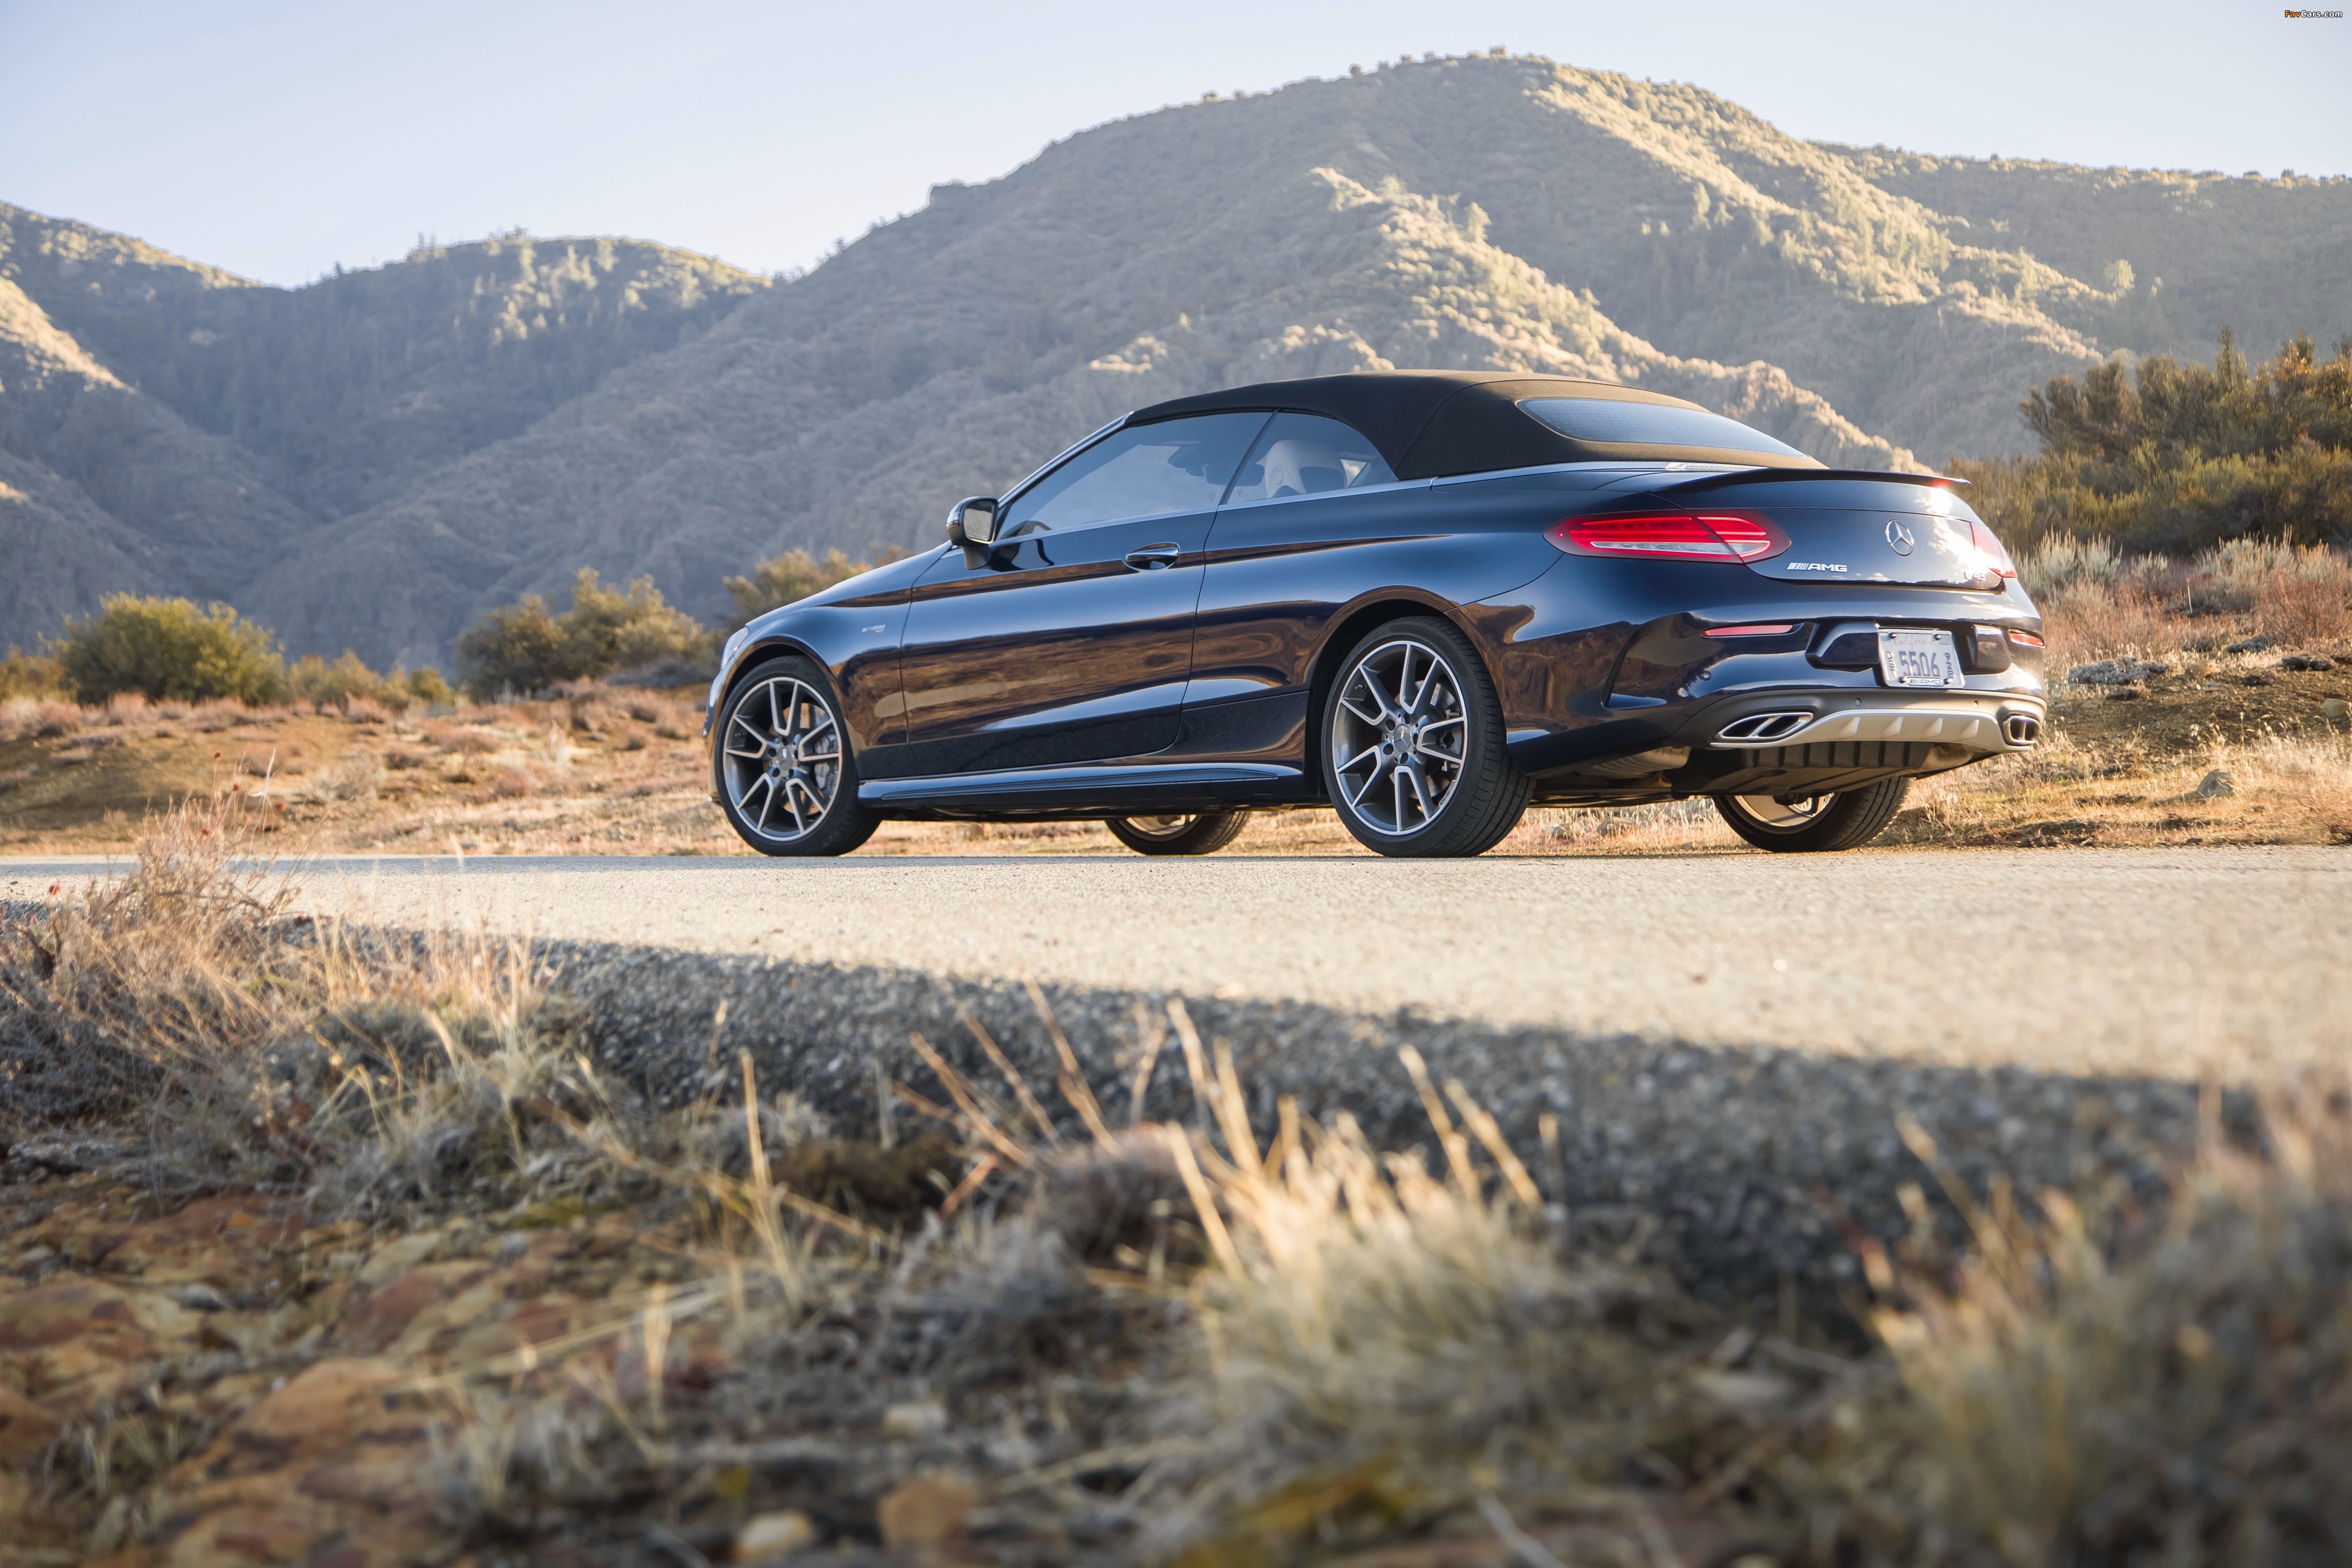 Mercedes-AMG C 43 4MATIC Cabriolet North America (A205) 2016 images (4096 x 2731)